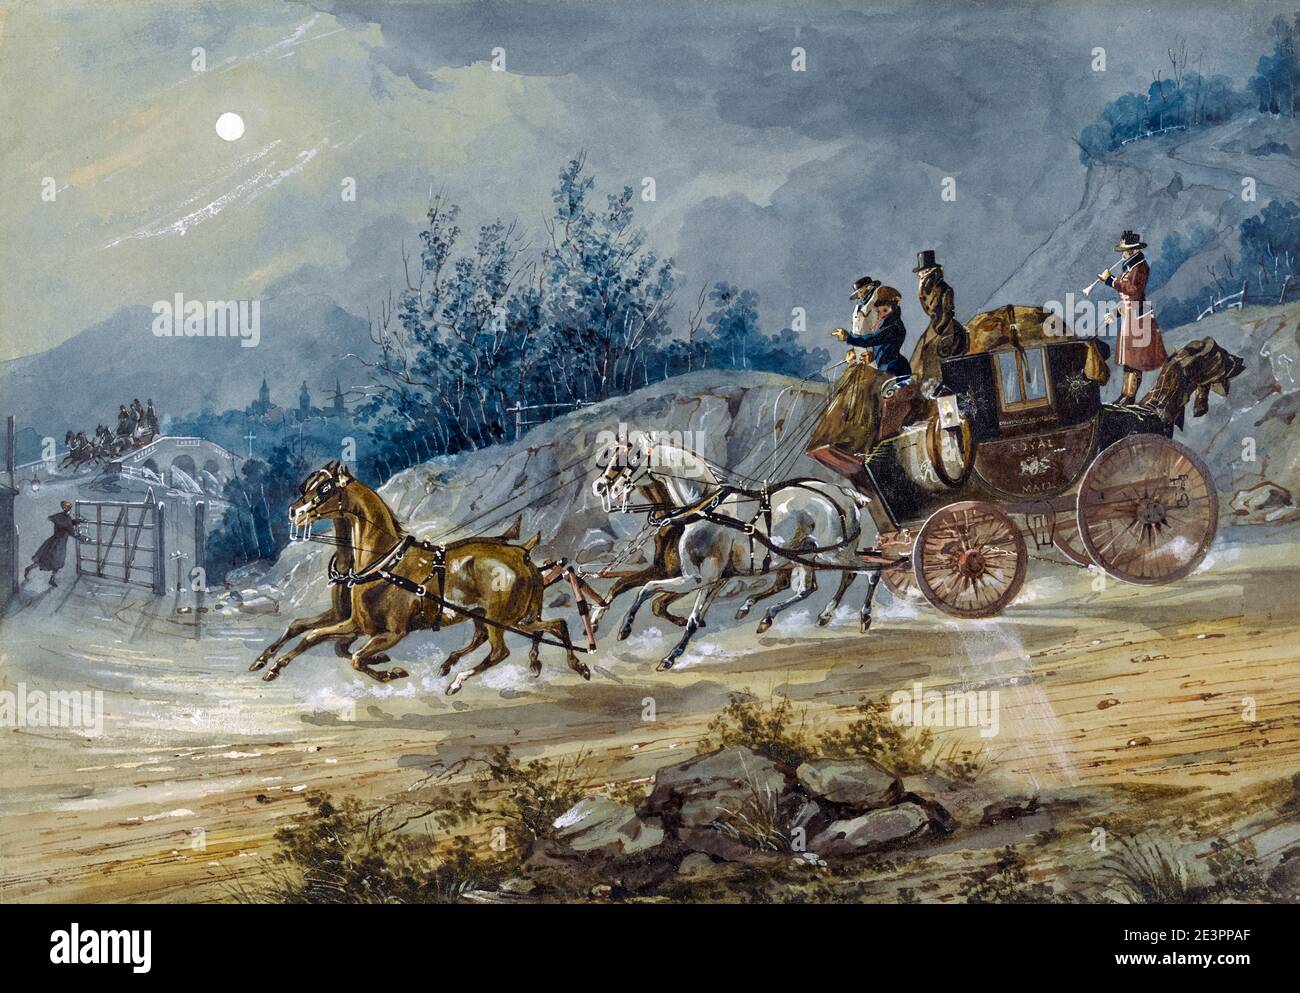 The London-Dumphries (sic) Royal Mail coach and horses, painting by Charles B. Newhouse, 1830-1840 Stock Photo